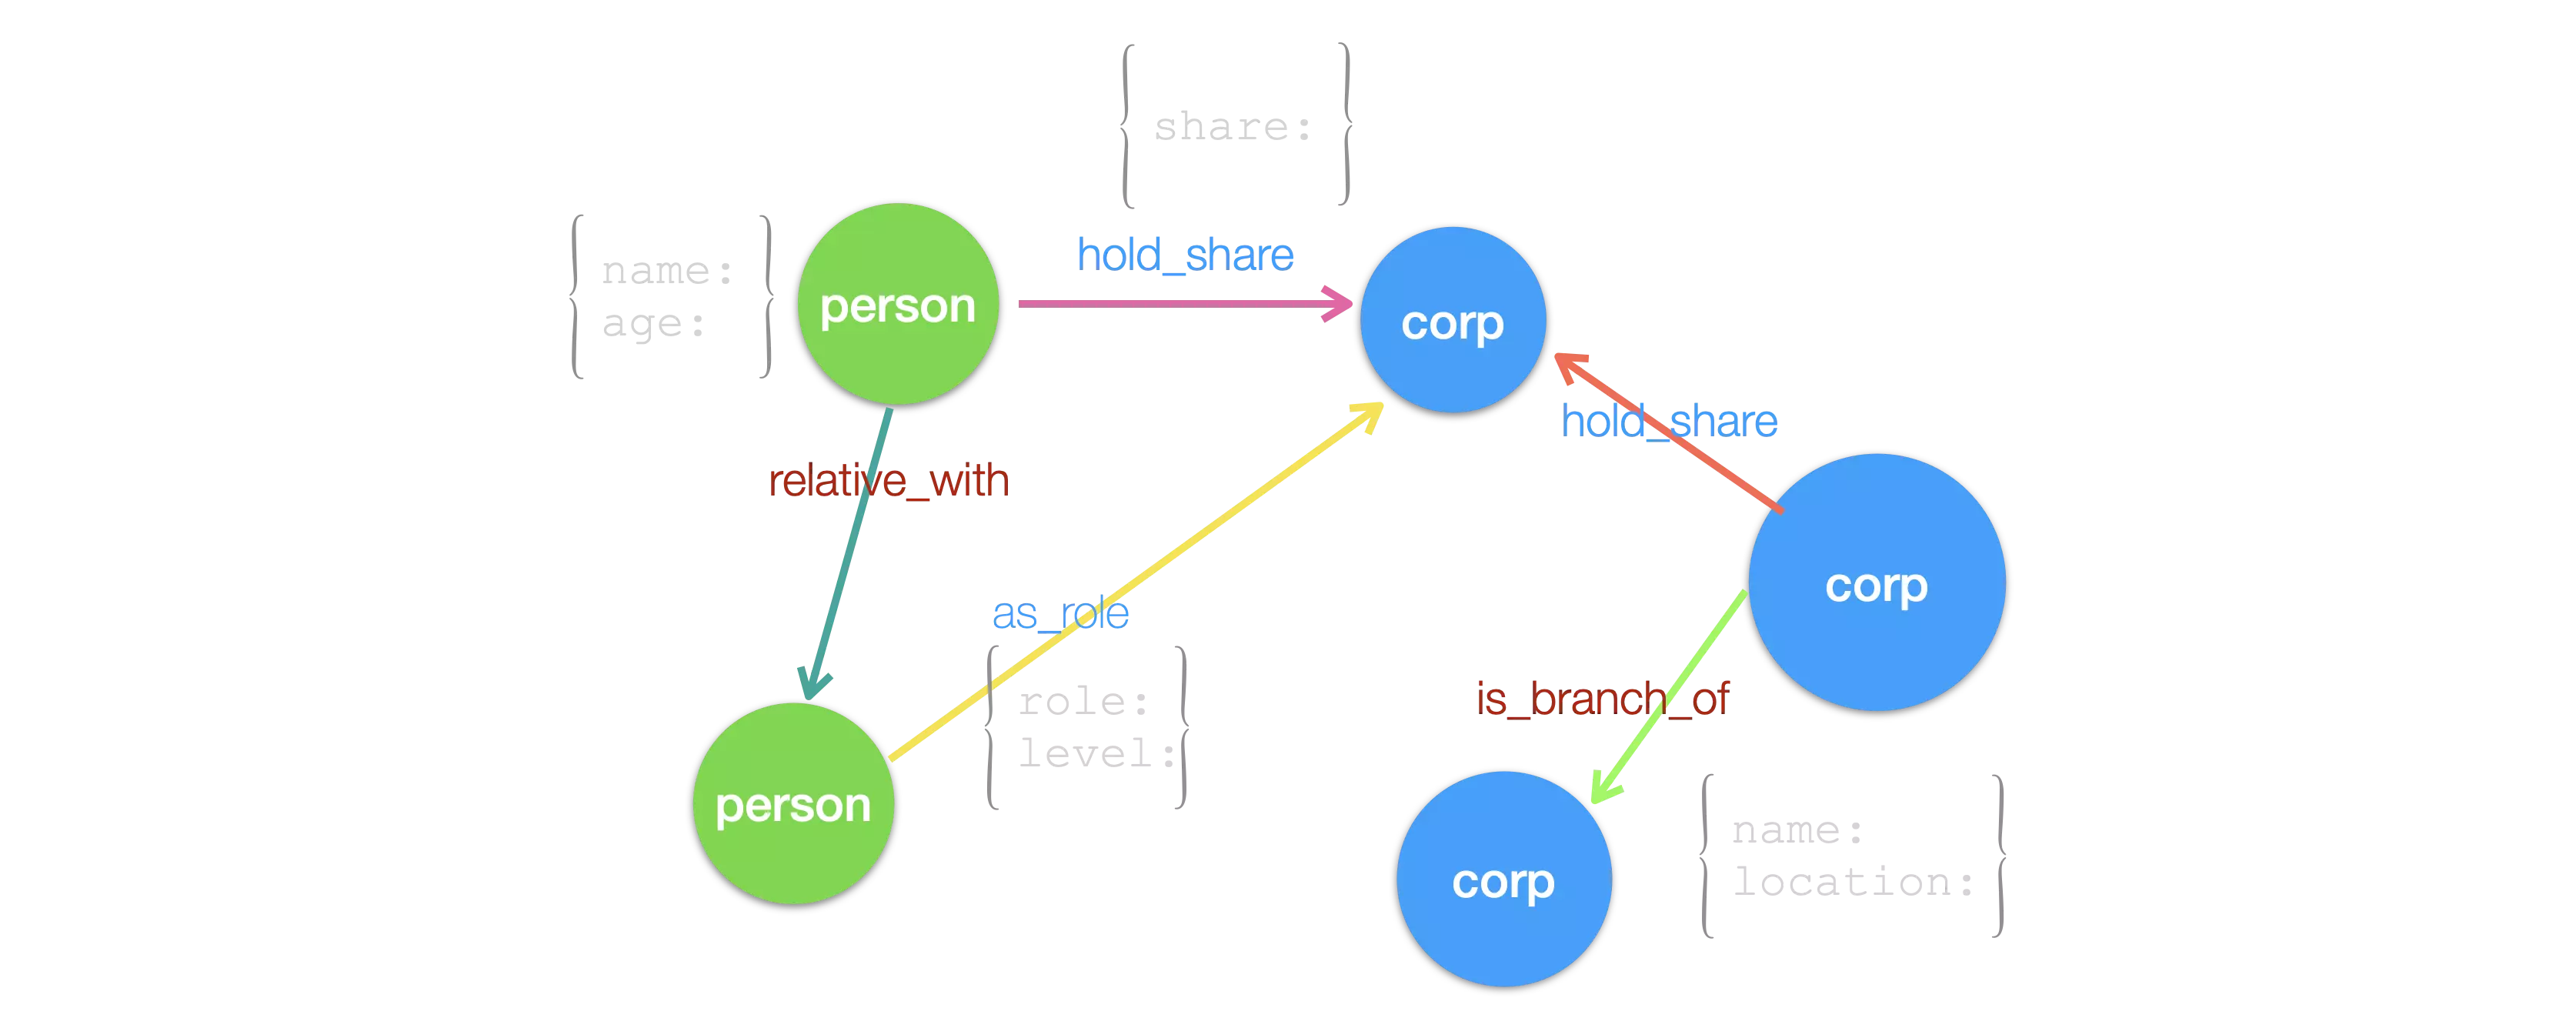 /corp-rel-graph/why_0_graph_based.webp